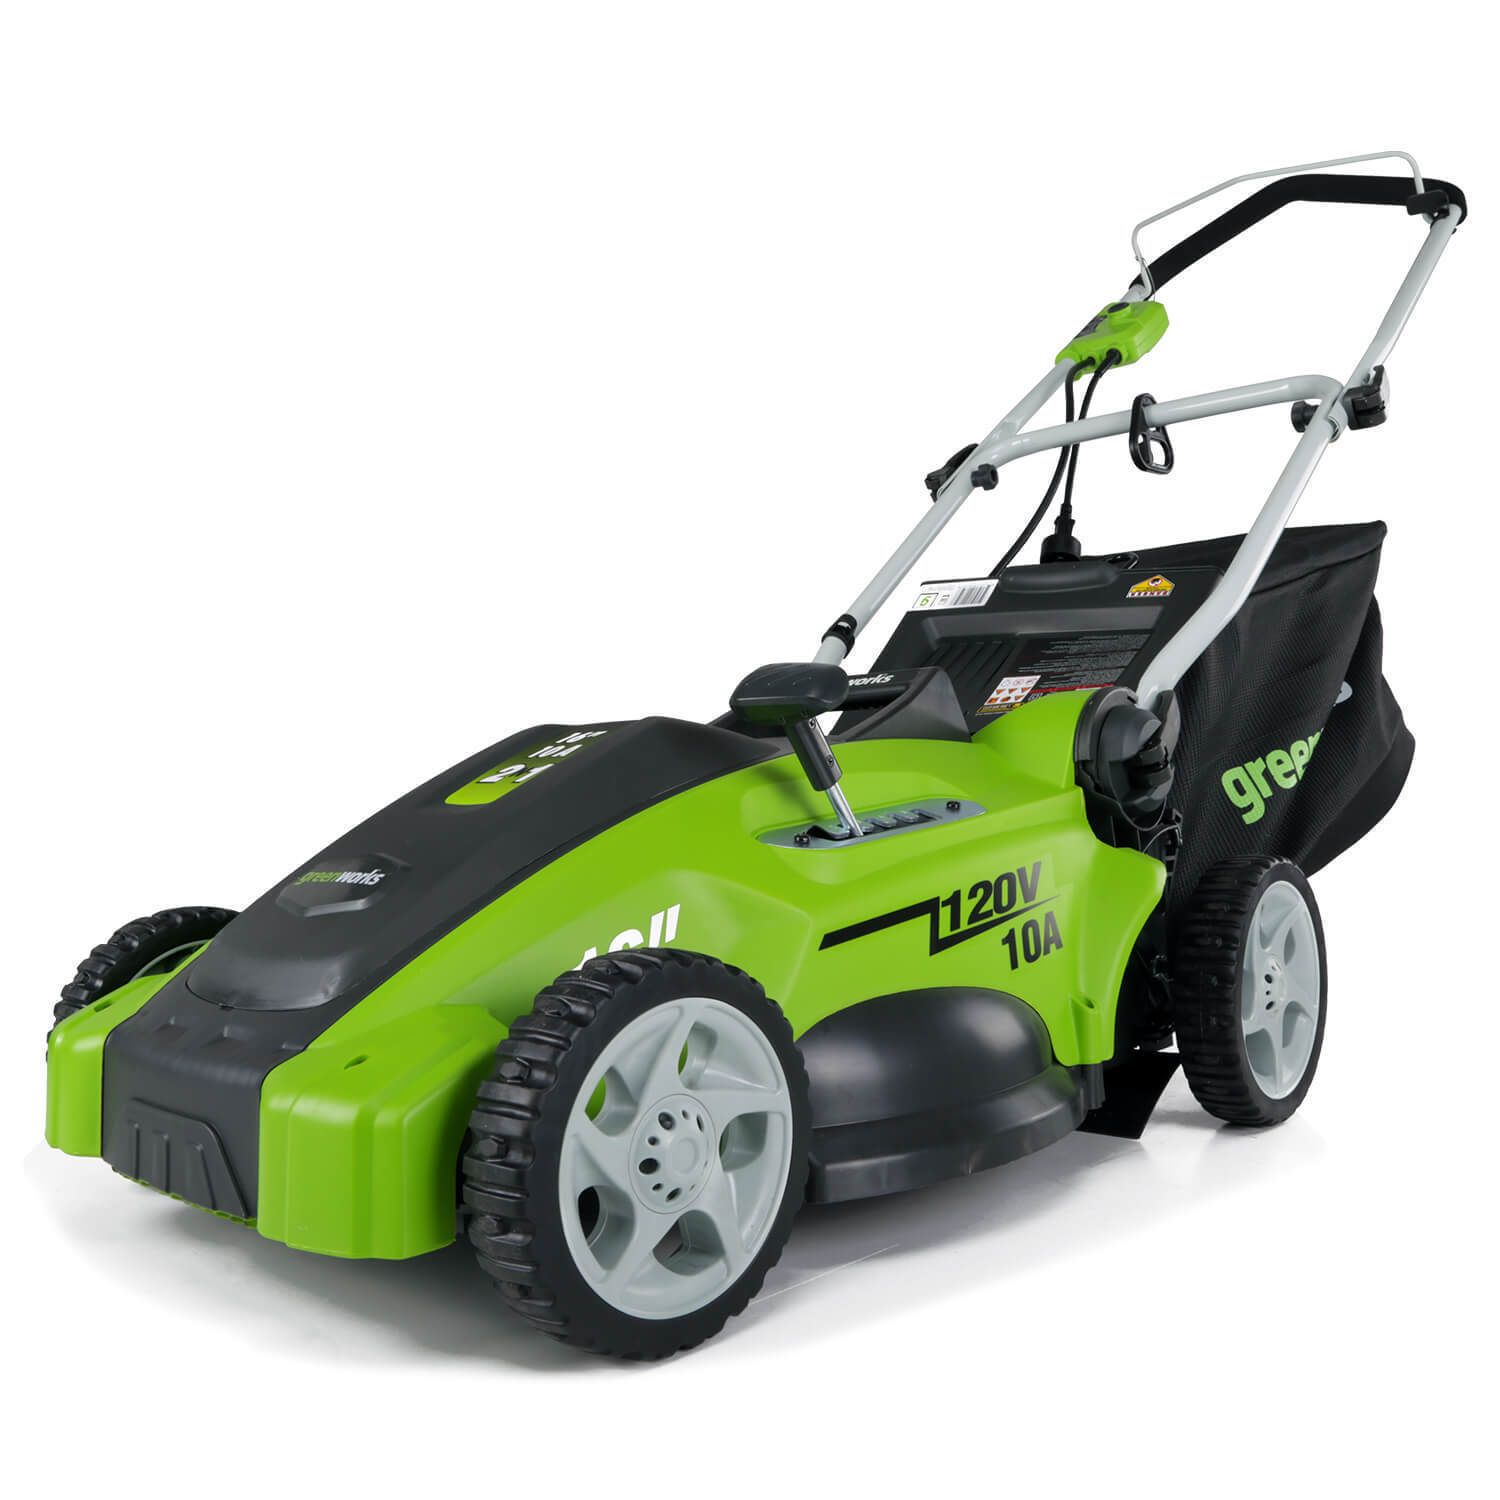 Greenworks 16" Corded Electric 10 Amp Walk-Behind Push Lawn Mower 25142 - image 1 of 11